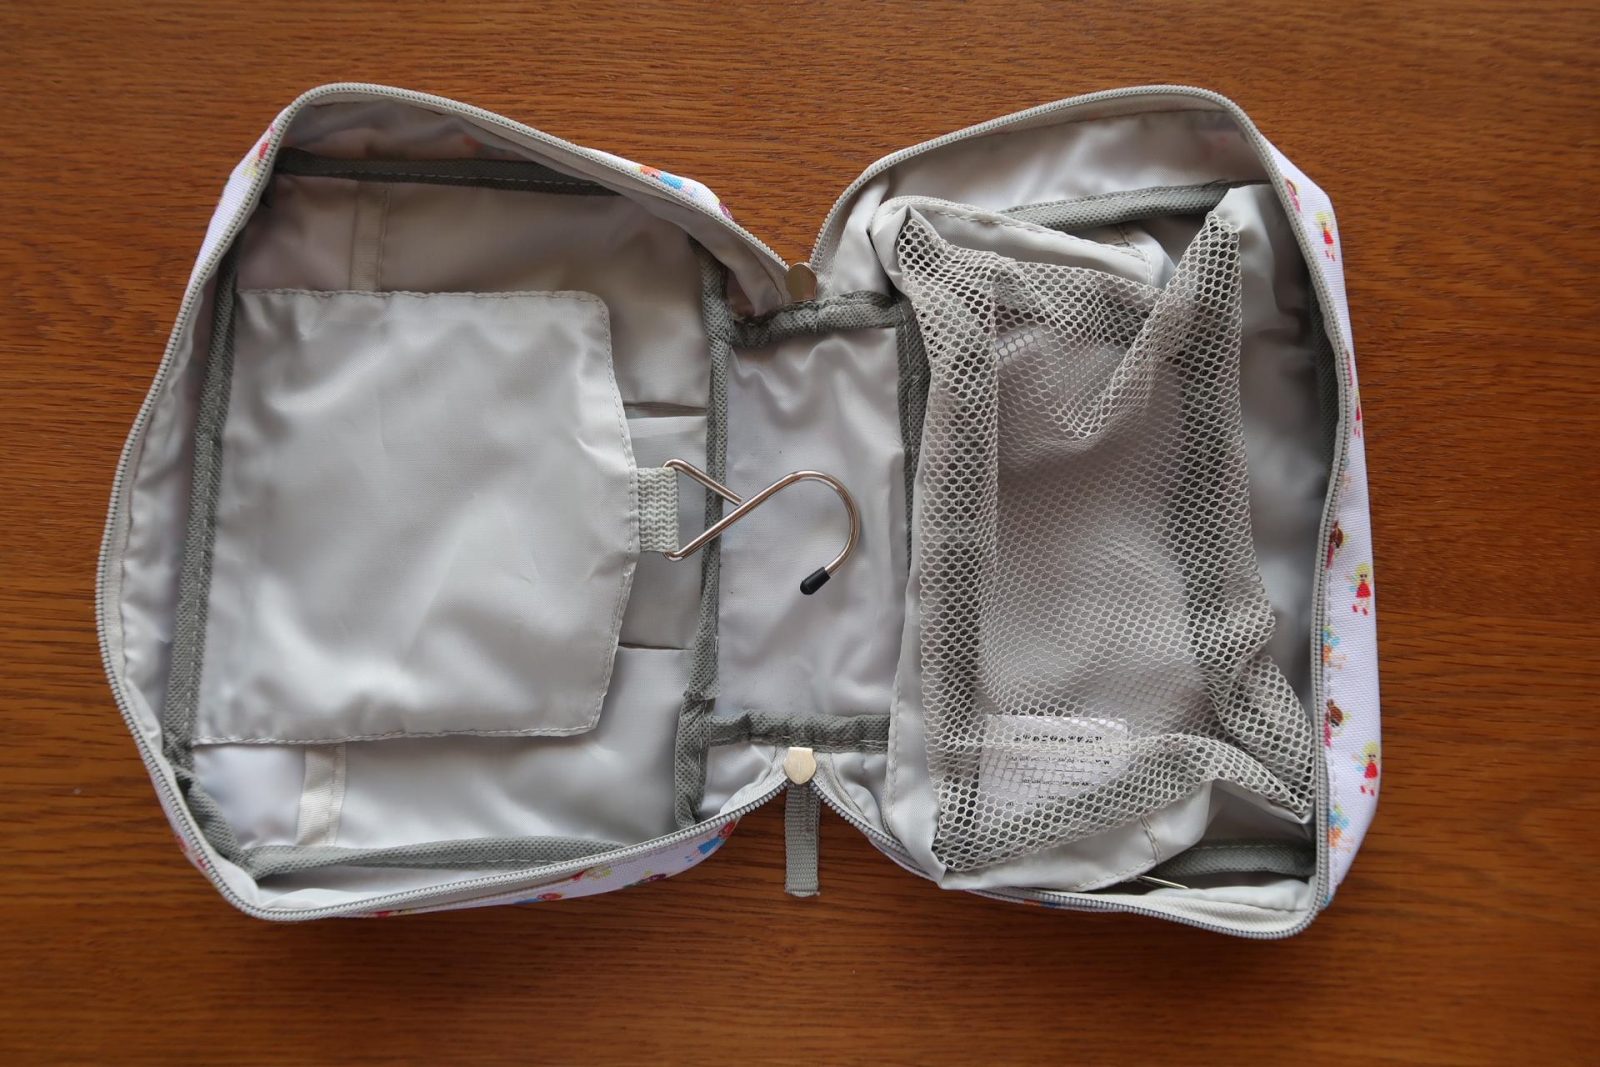 Inside a tiddler and nippers travel and wash bag